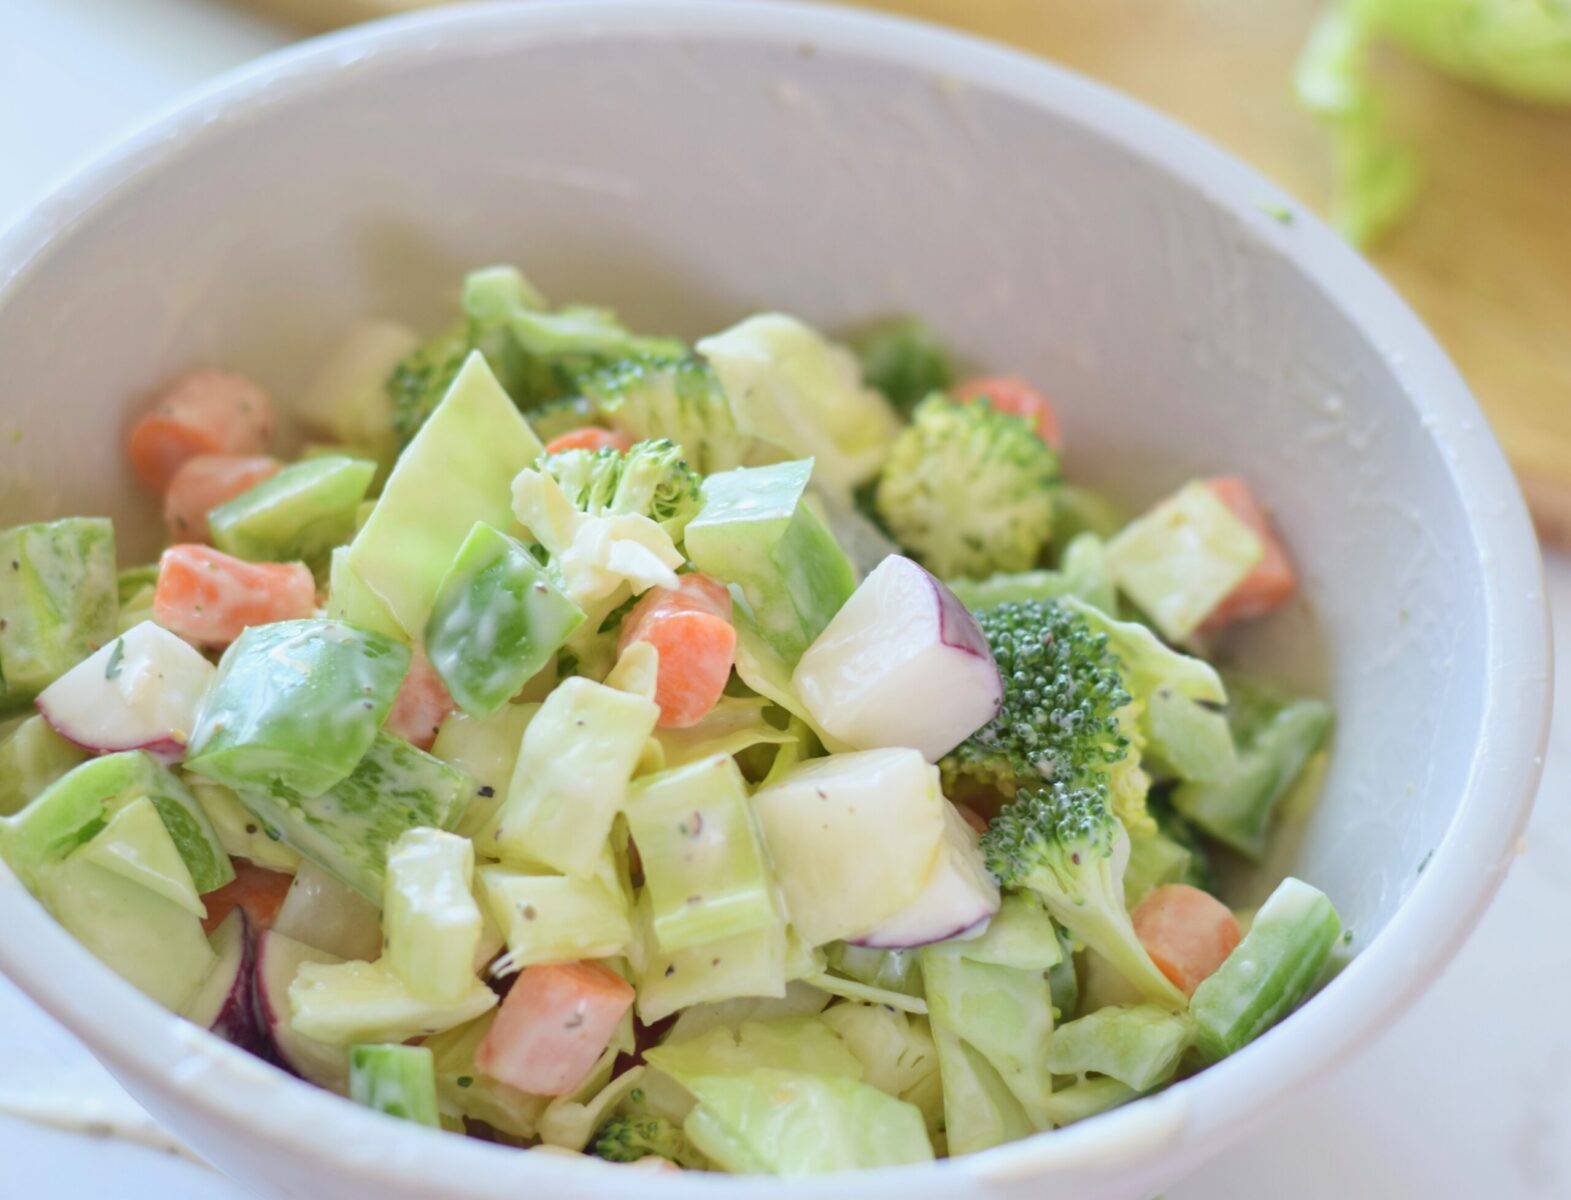 Healthy 8 Salad with dressing